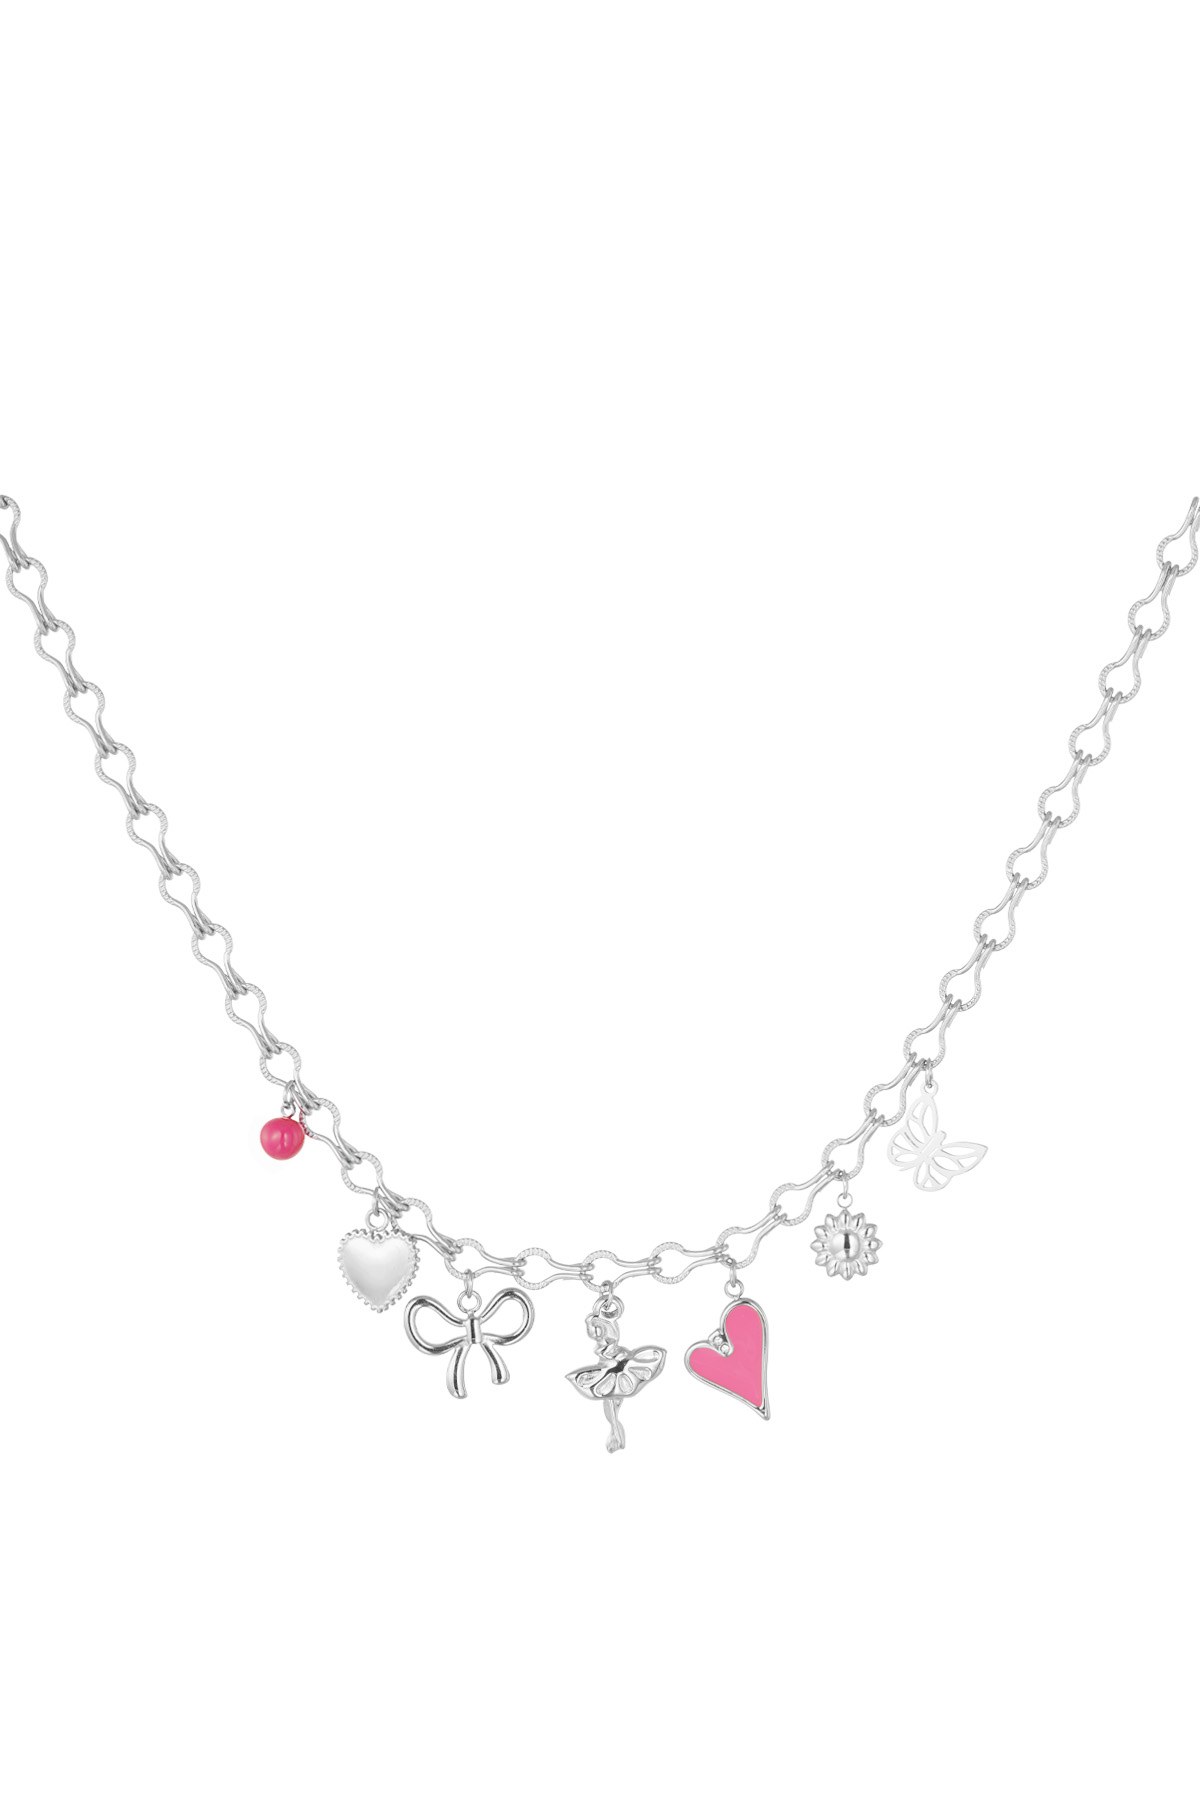 Charm necklace dancing in the sky - silver